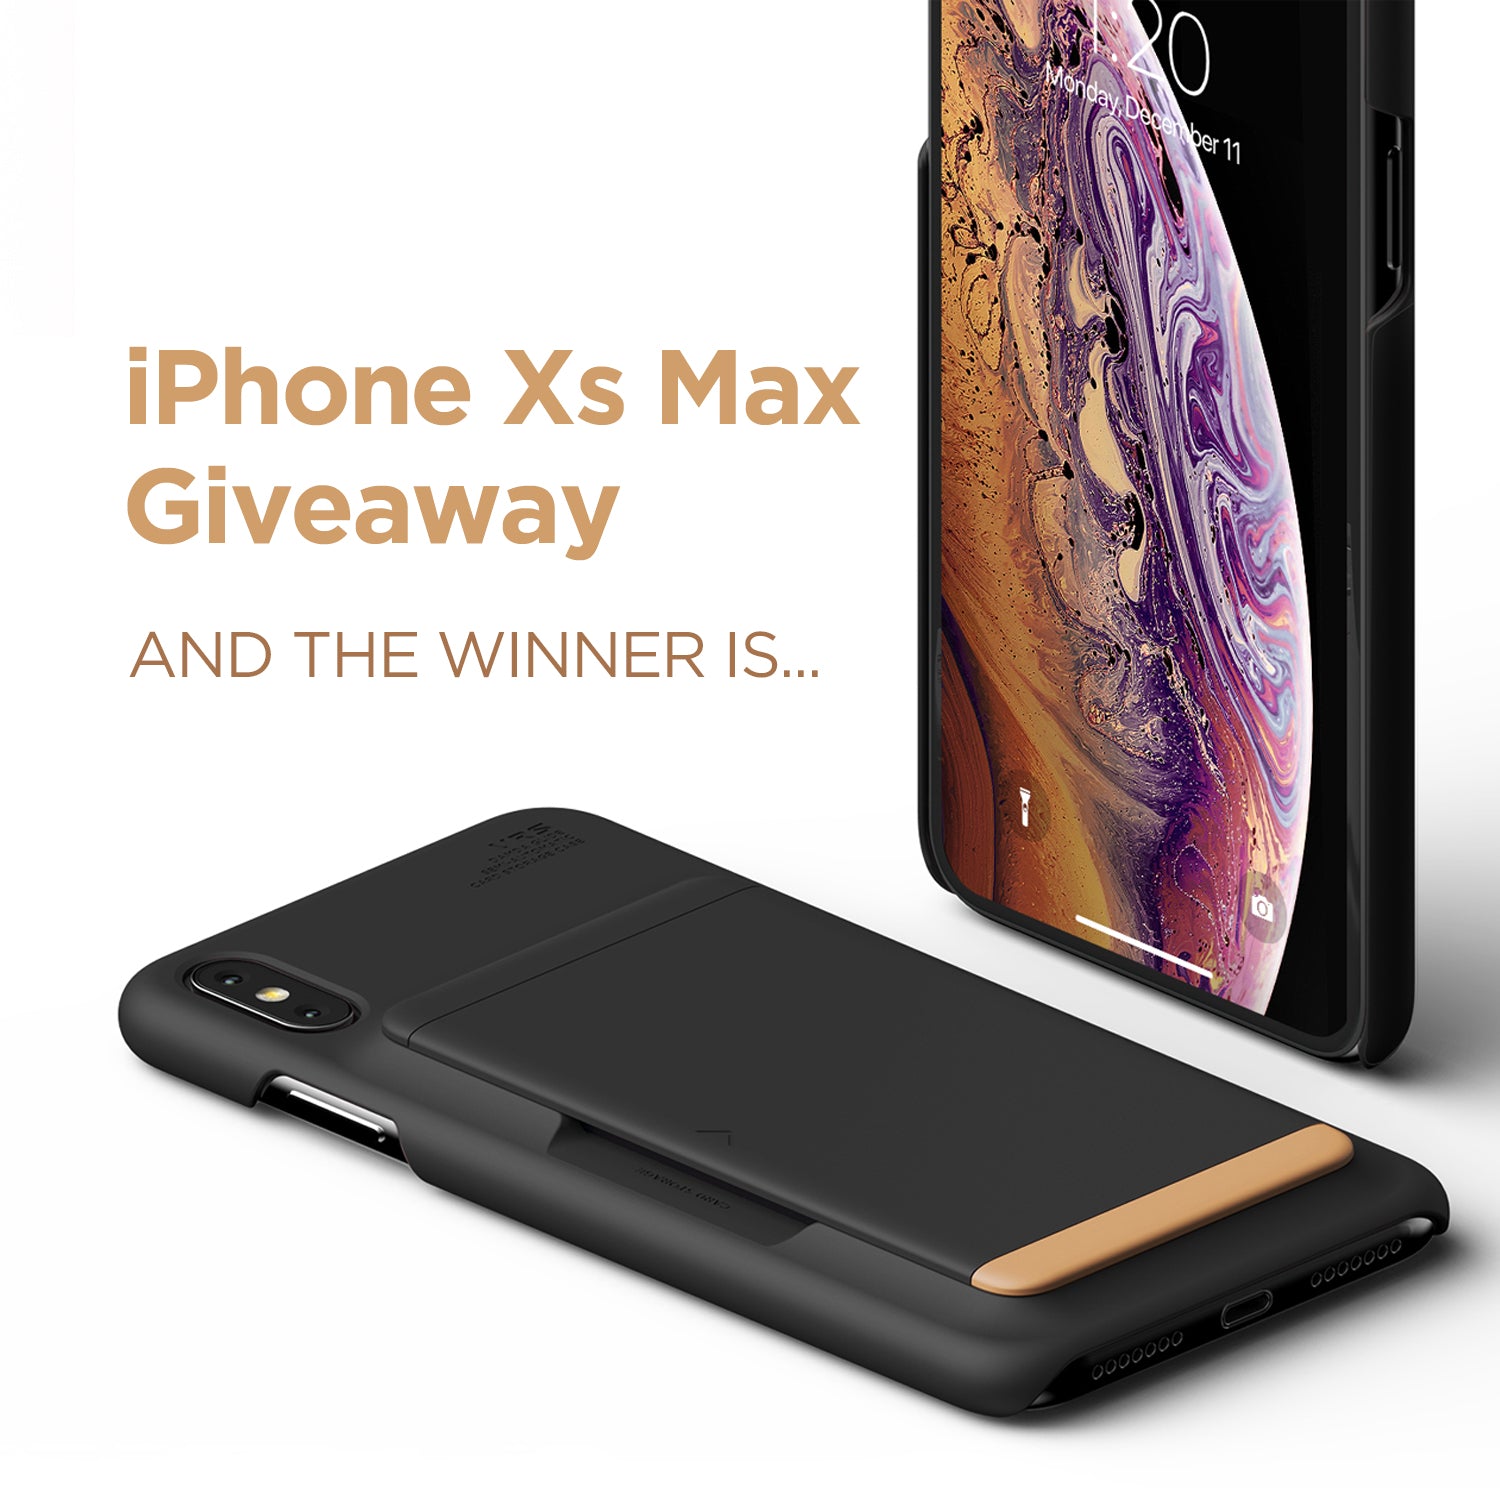 VRS Design | iPhone Xs Max Giveaway Winner Announcement